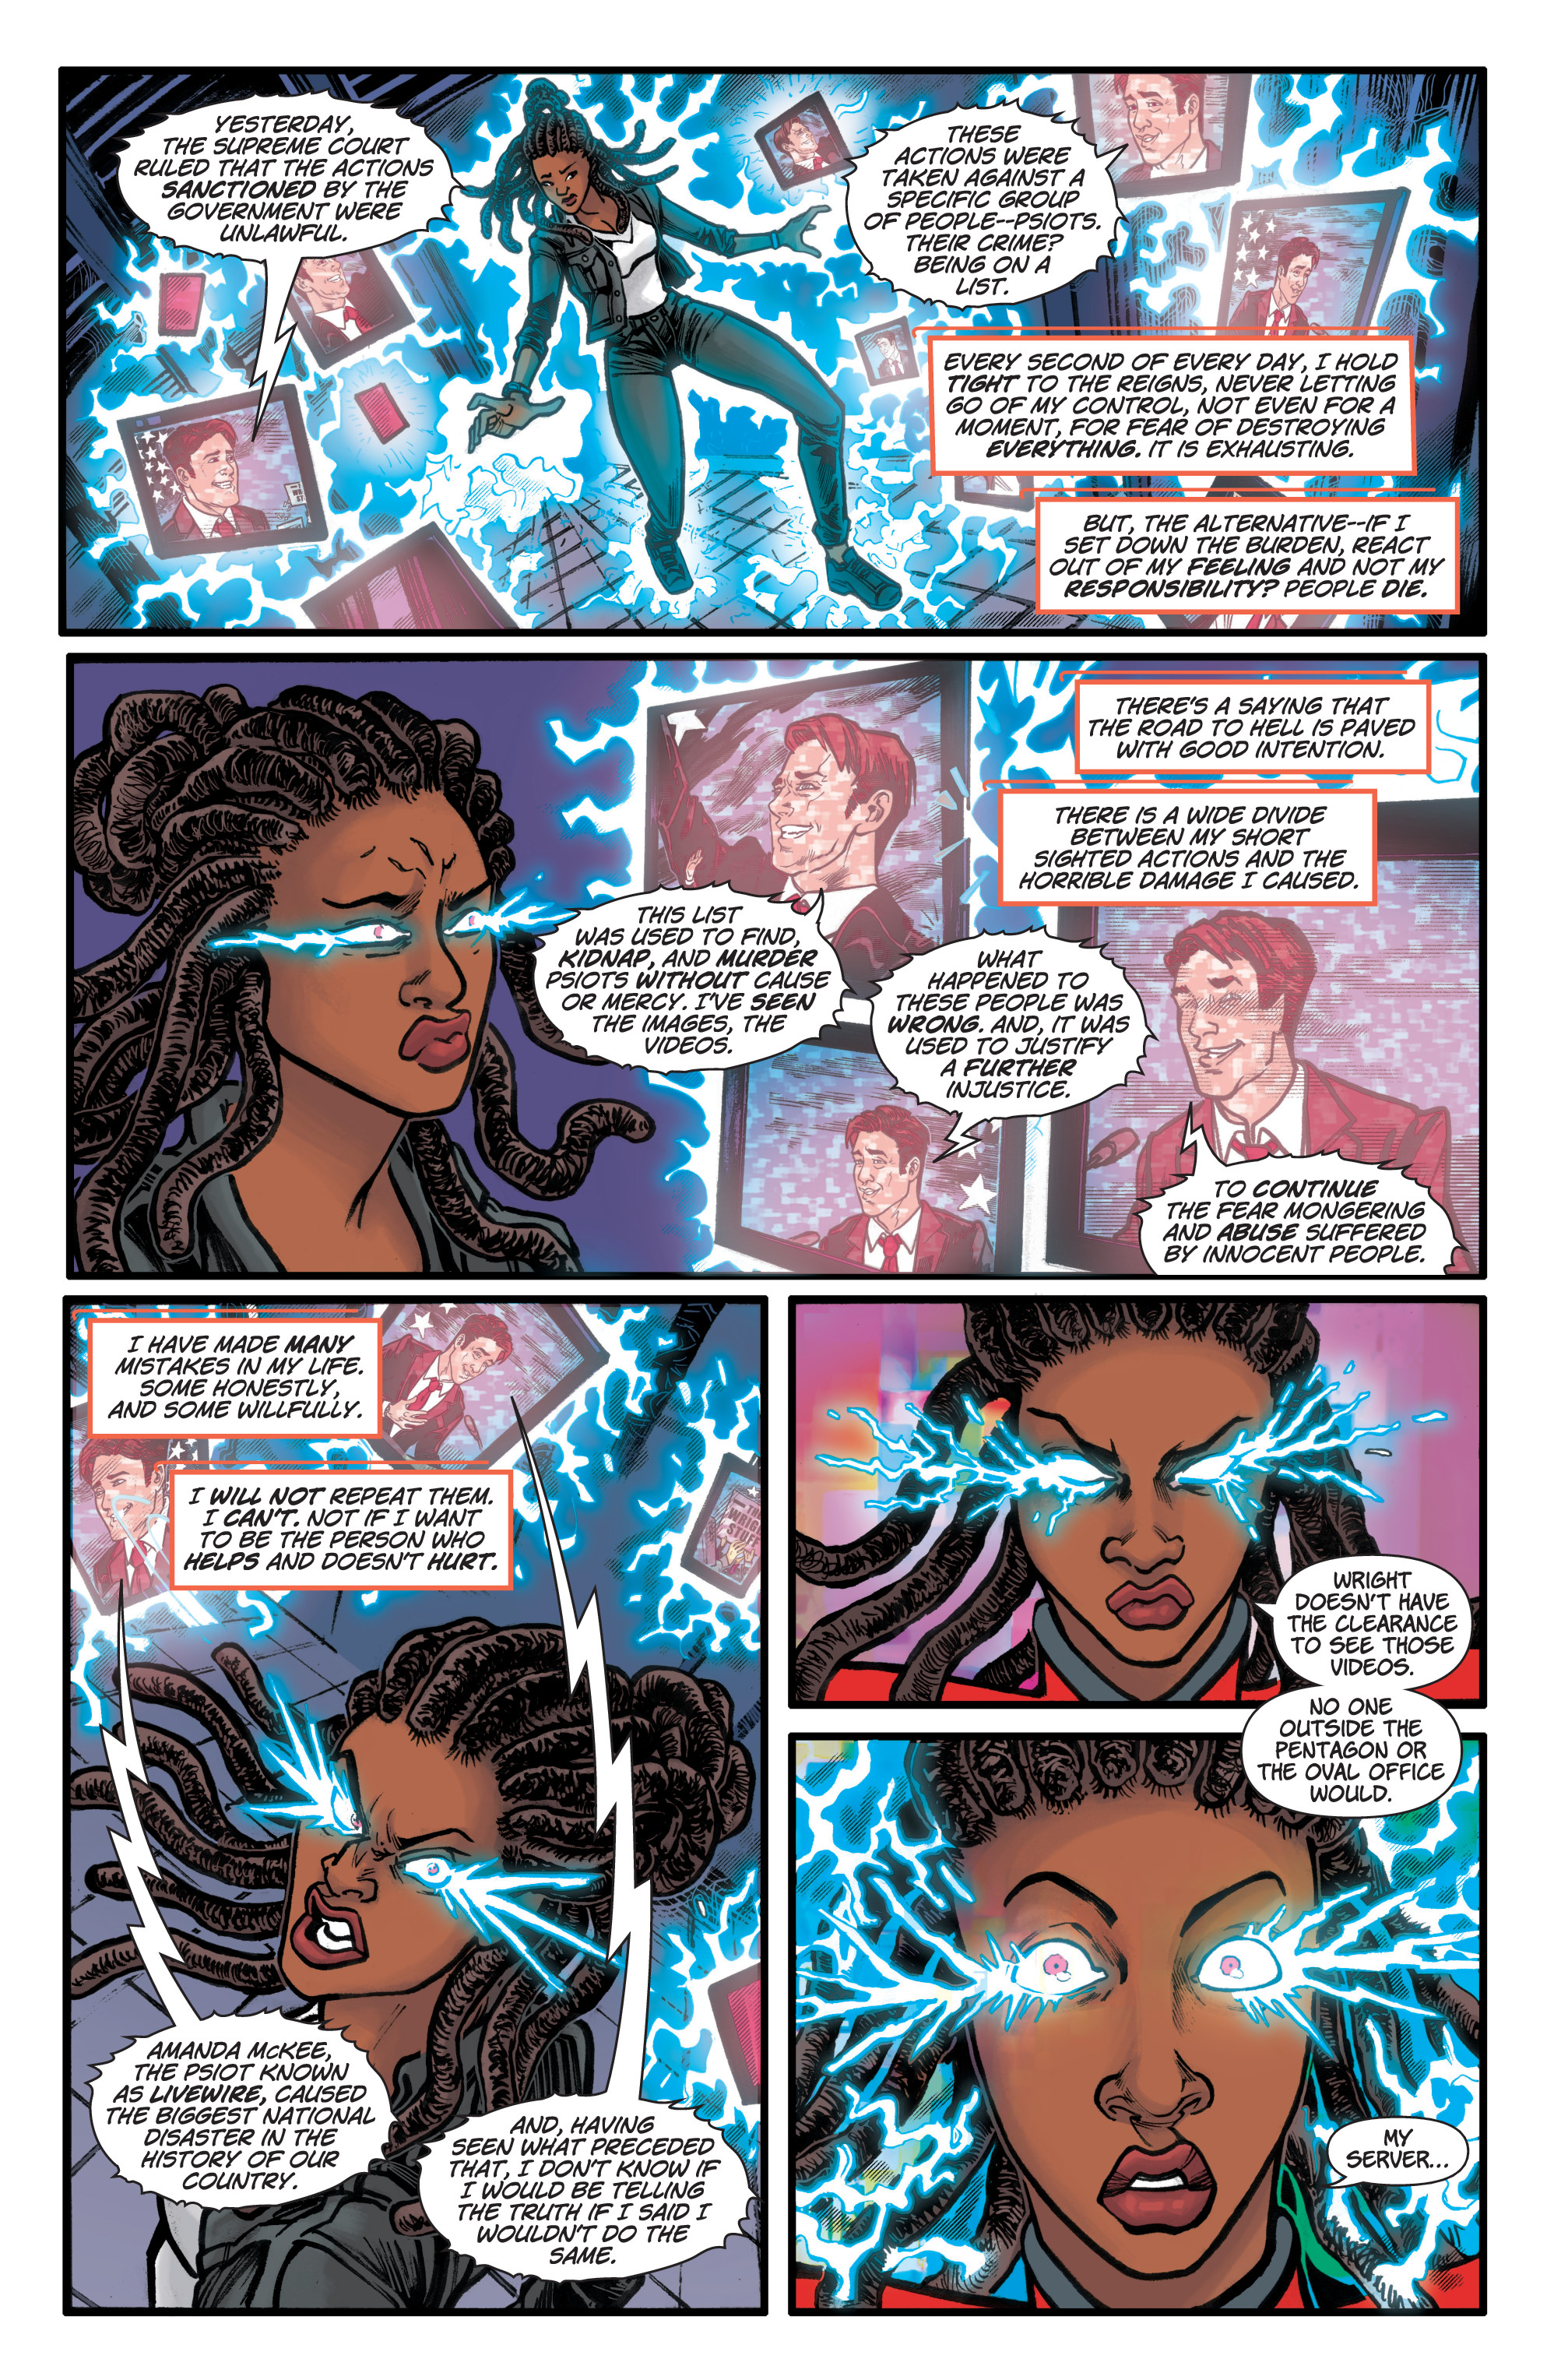 Livewire (2018-): Chapter 12 - Page 4